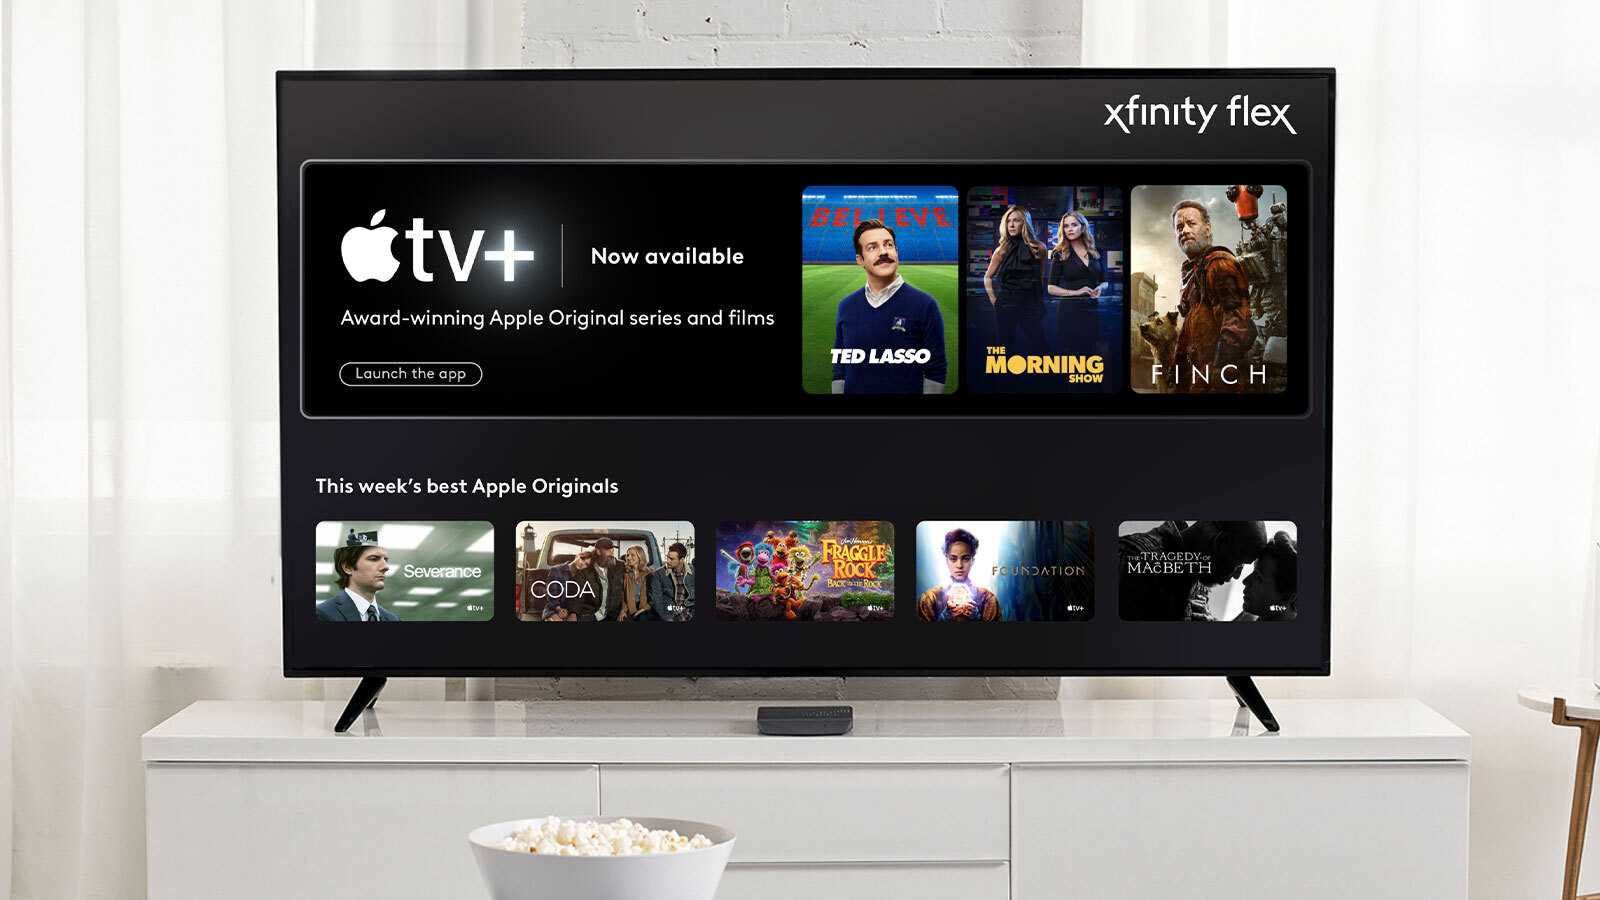 Comcast adds Apple TV+ support for tens of millions of Xfinity customers